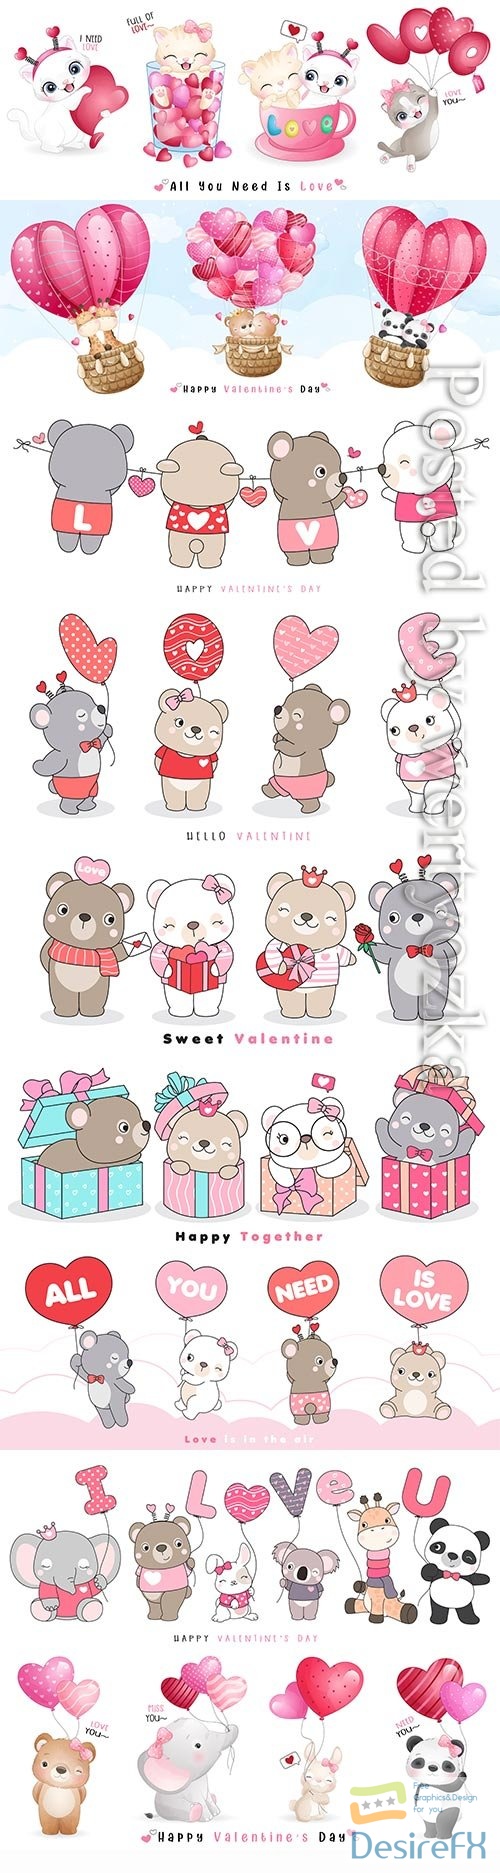 Cute funny doodle animals for valentine's day illustration